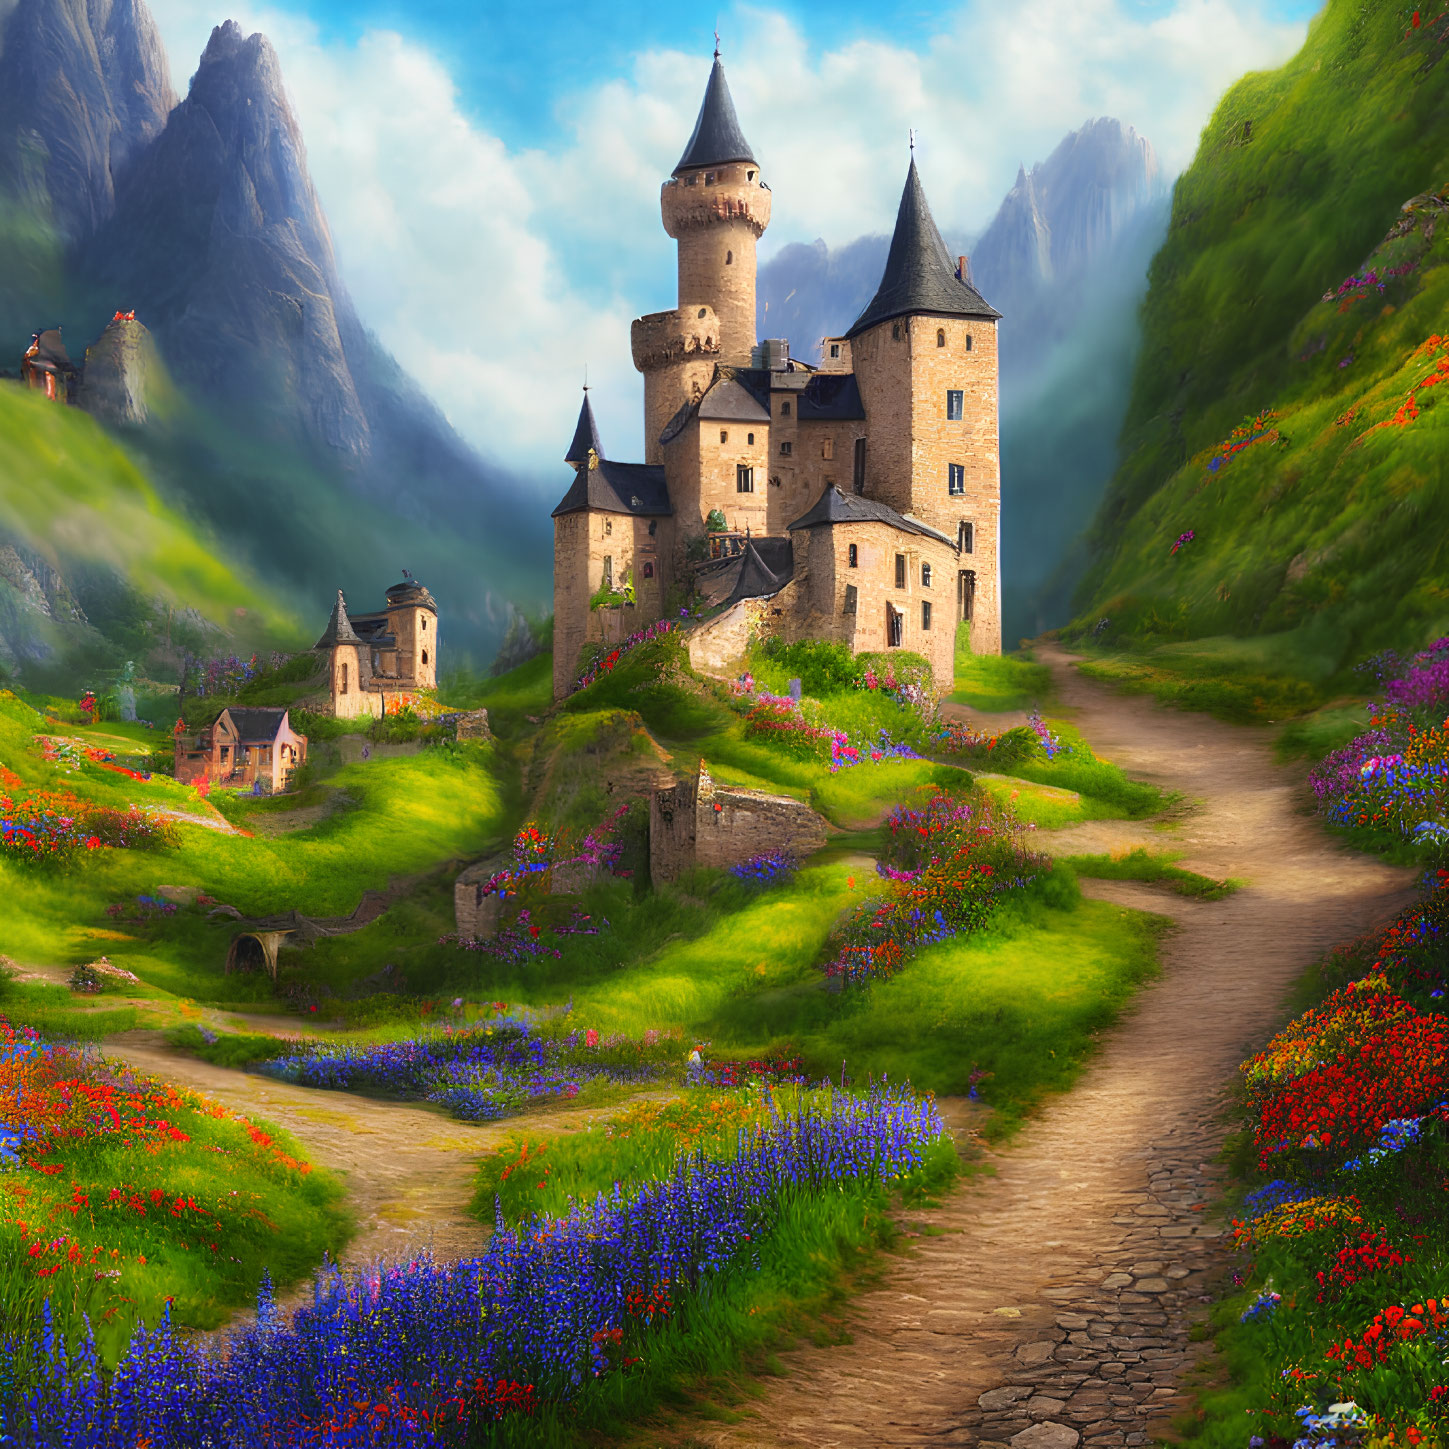 Castle surrounded by vibrant floral landscape and mountains